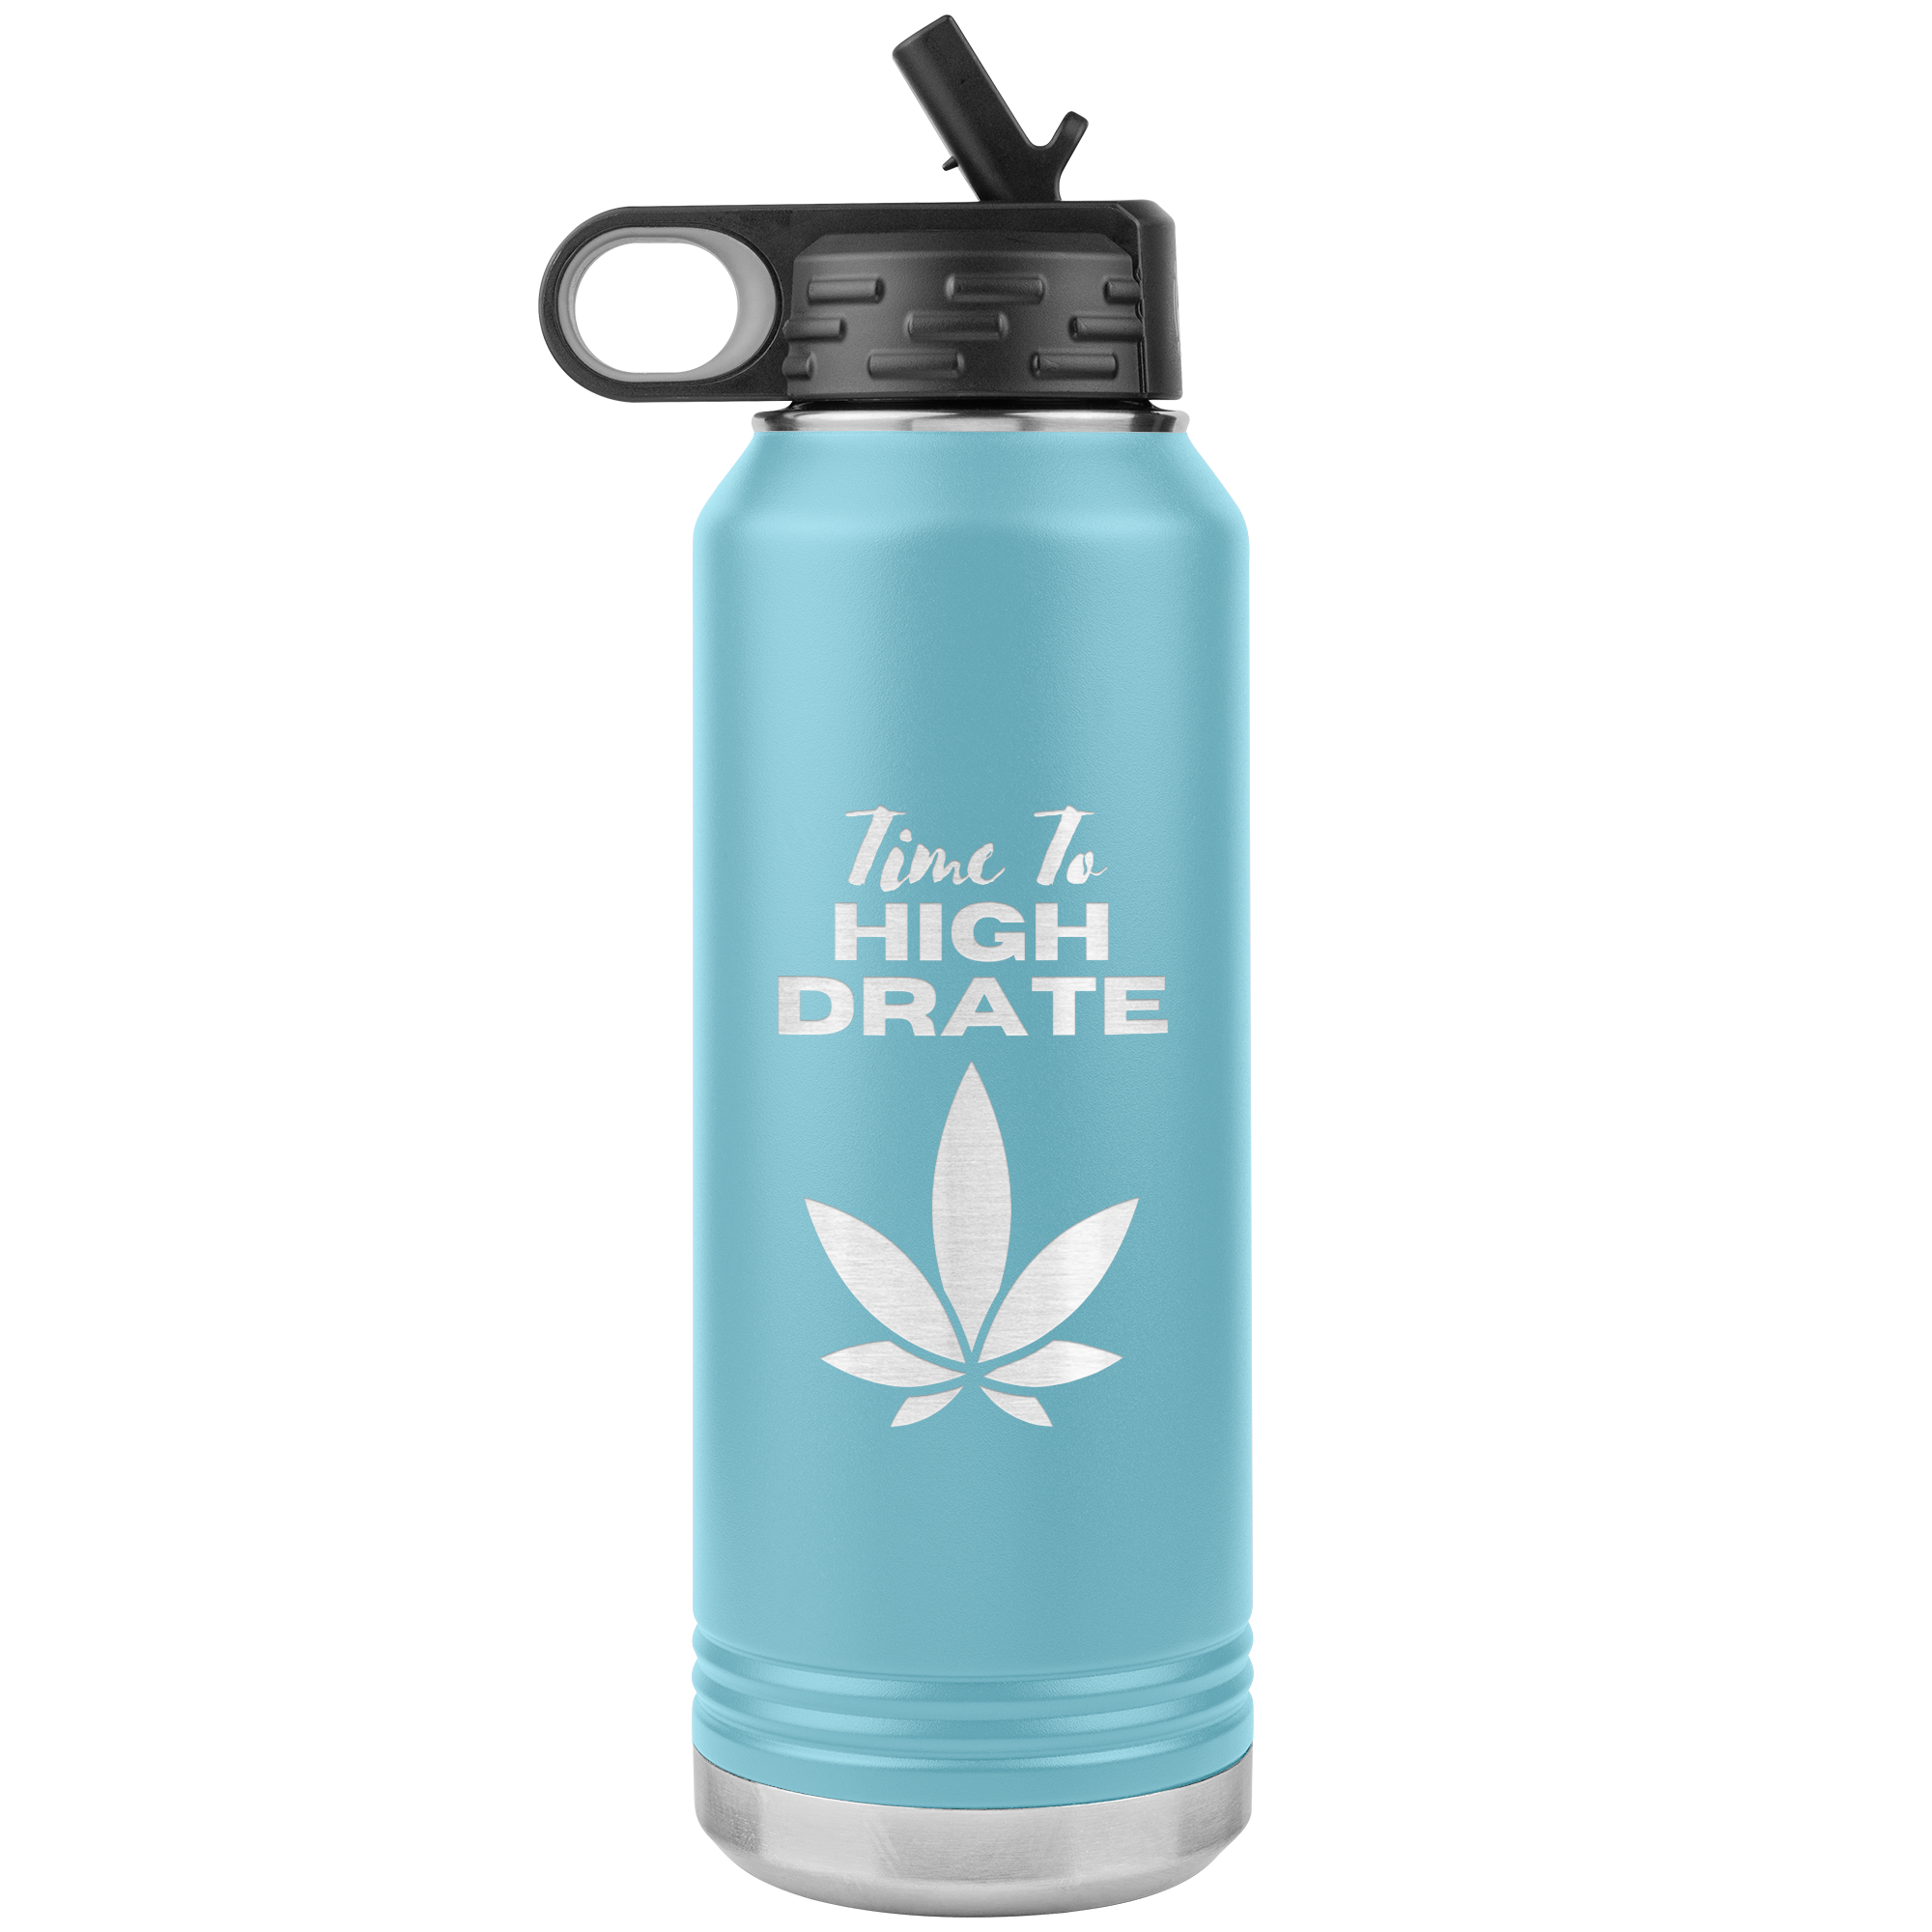 Time To Hydrate Cannabis Leaf Water Bottle 32 oz